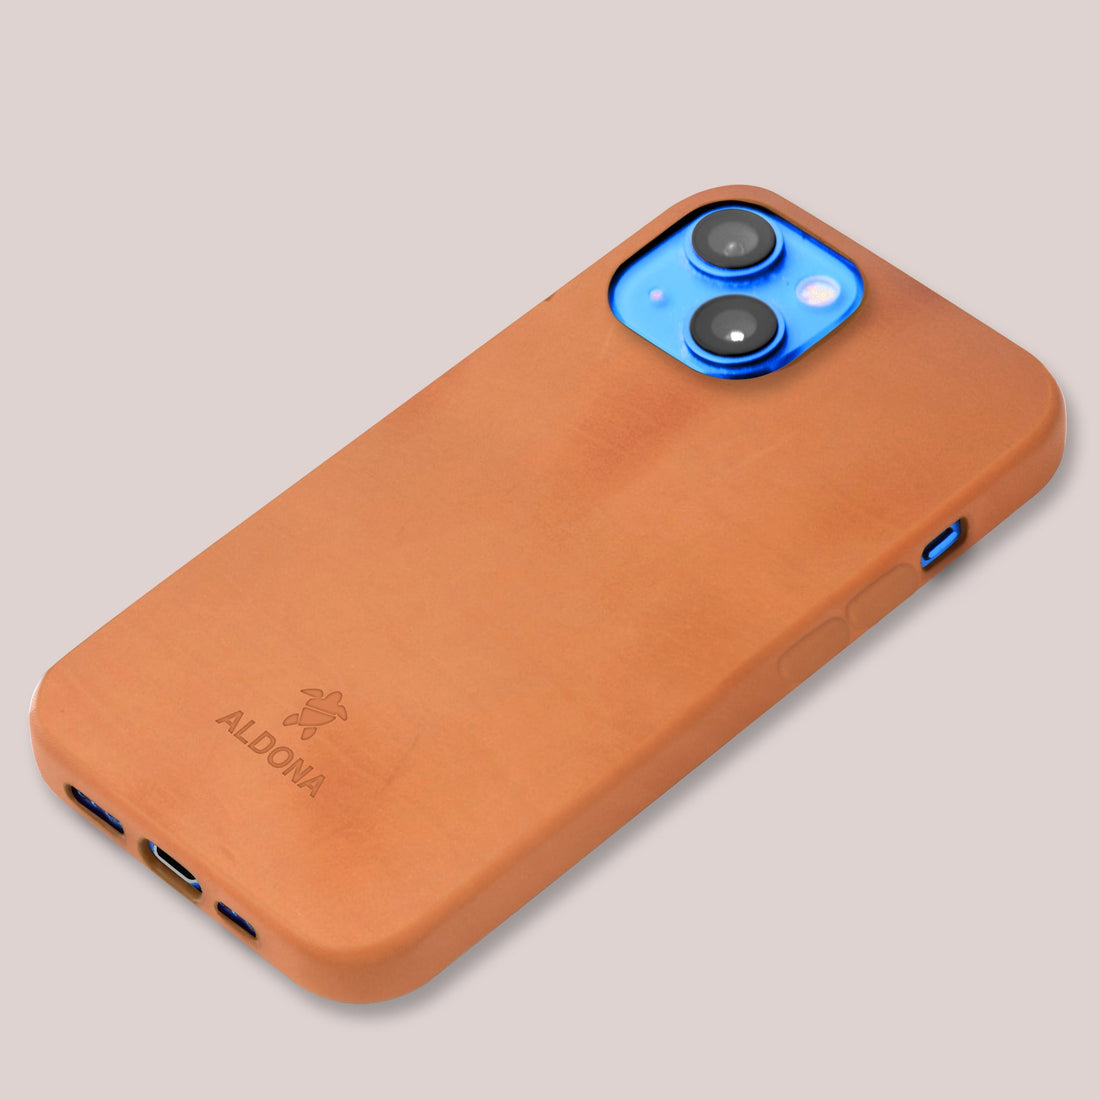 Kalon Case for iPhone 13 Pro Max with MagSafe Compatibility - Vintage Tan